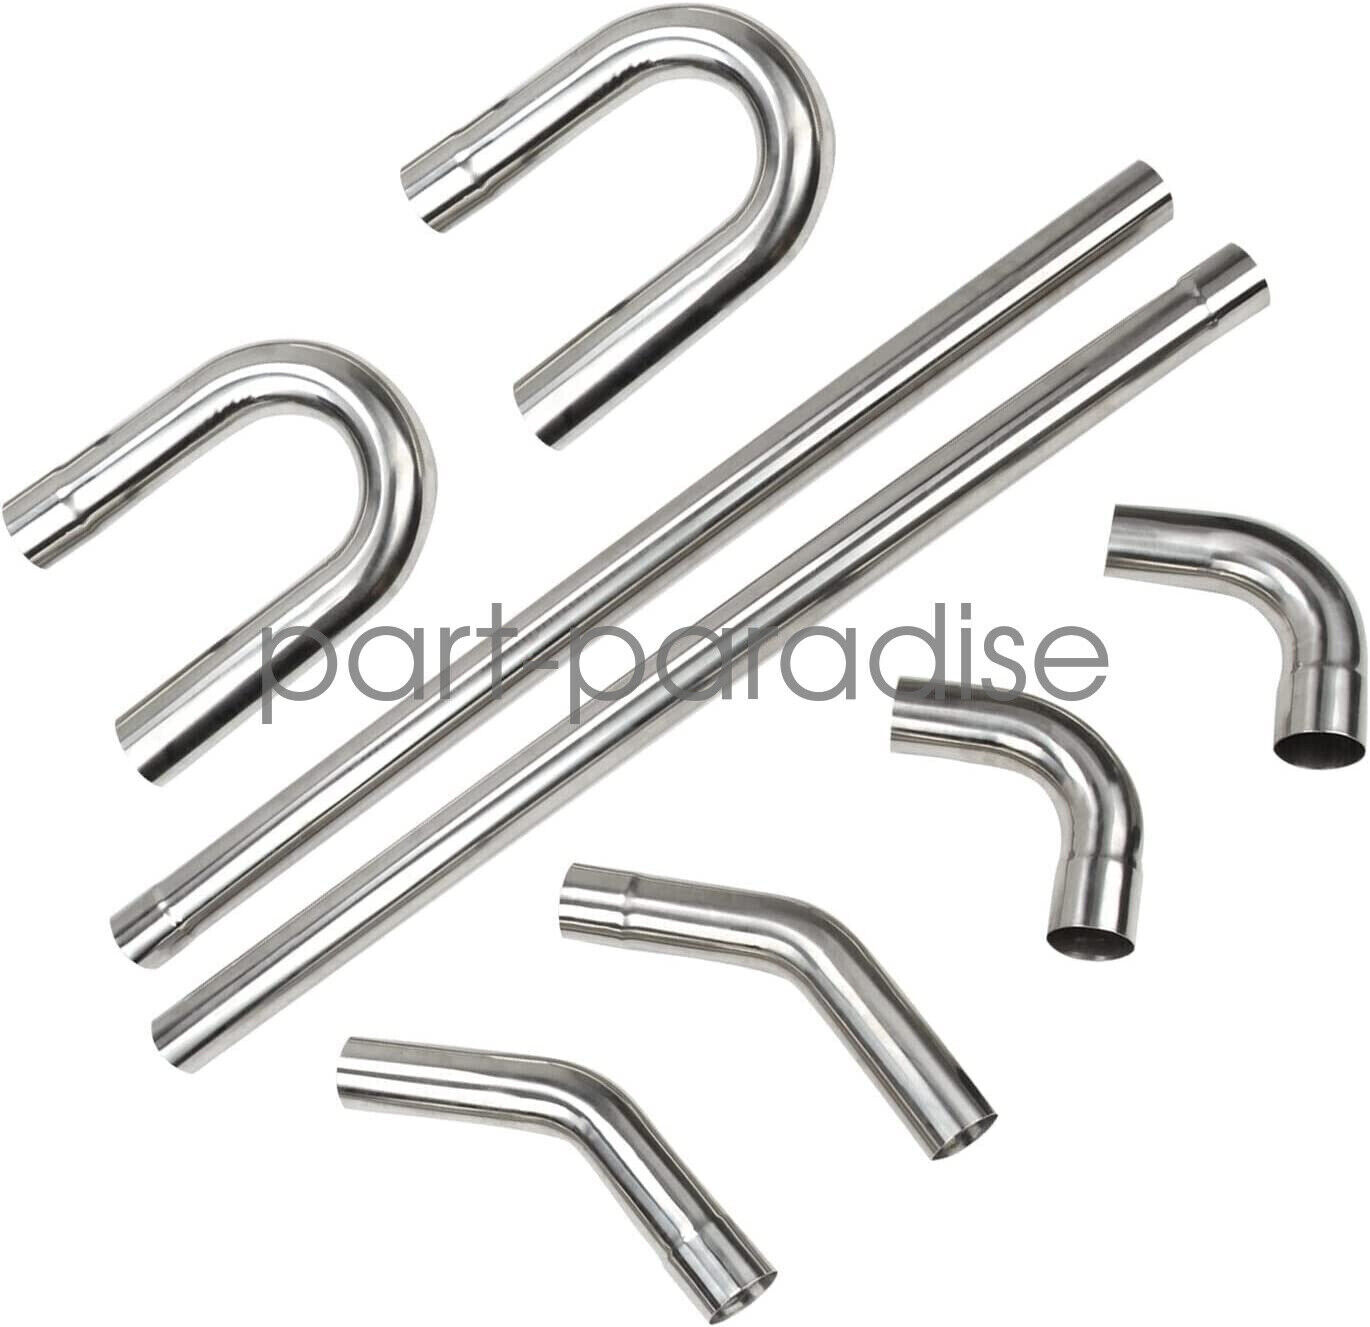 3 Inch 76mm Universal Stainless Steel Exhaust Pipe Mandrel Straight Bend Kit